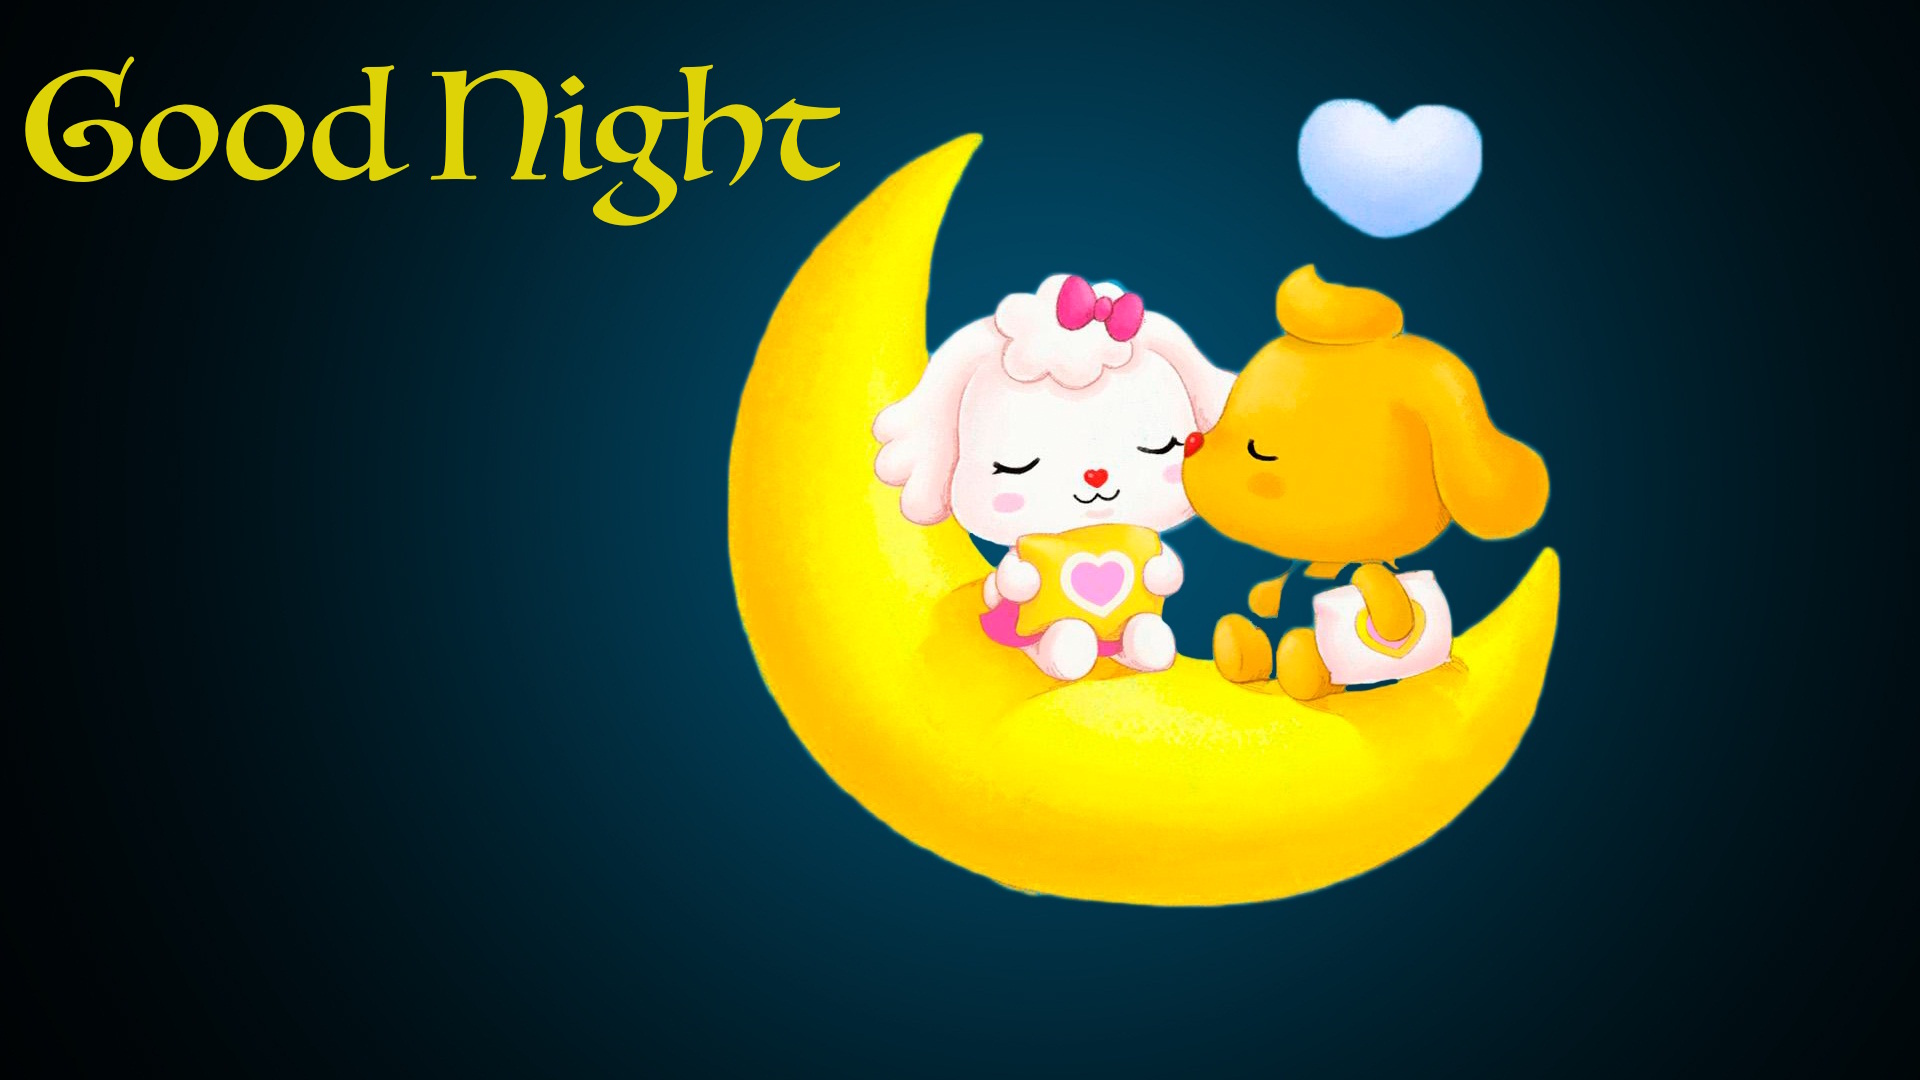 Some Cute Good Night Images In Full Hd Resolution